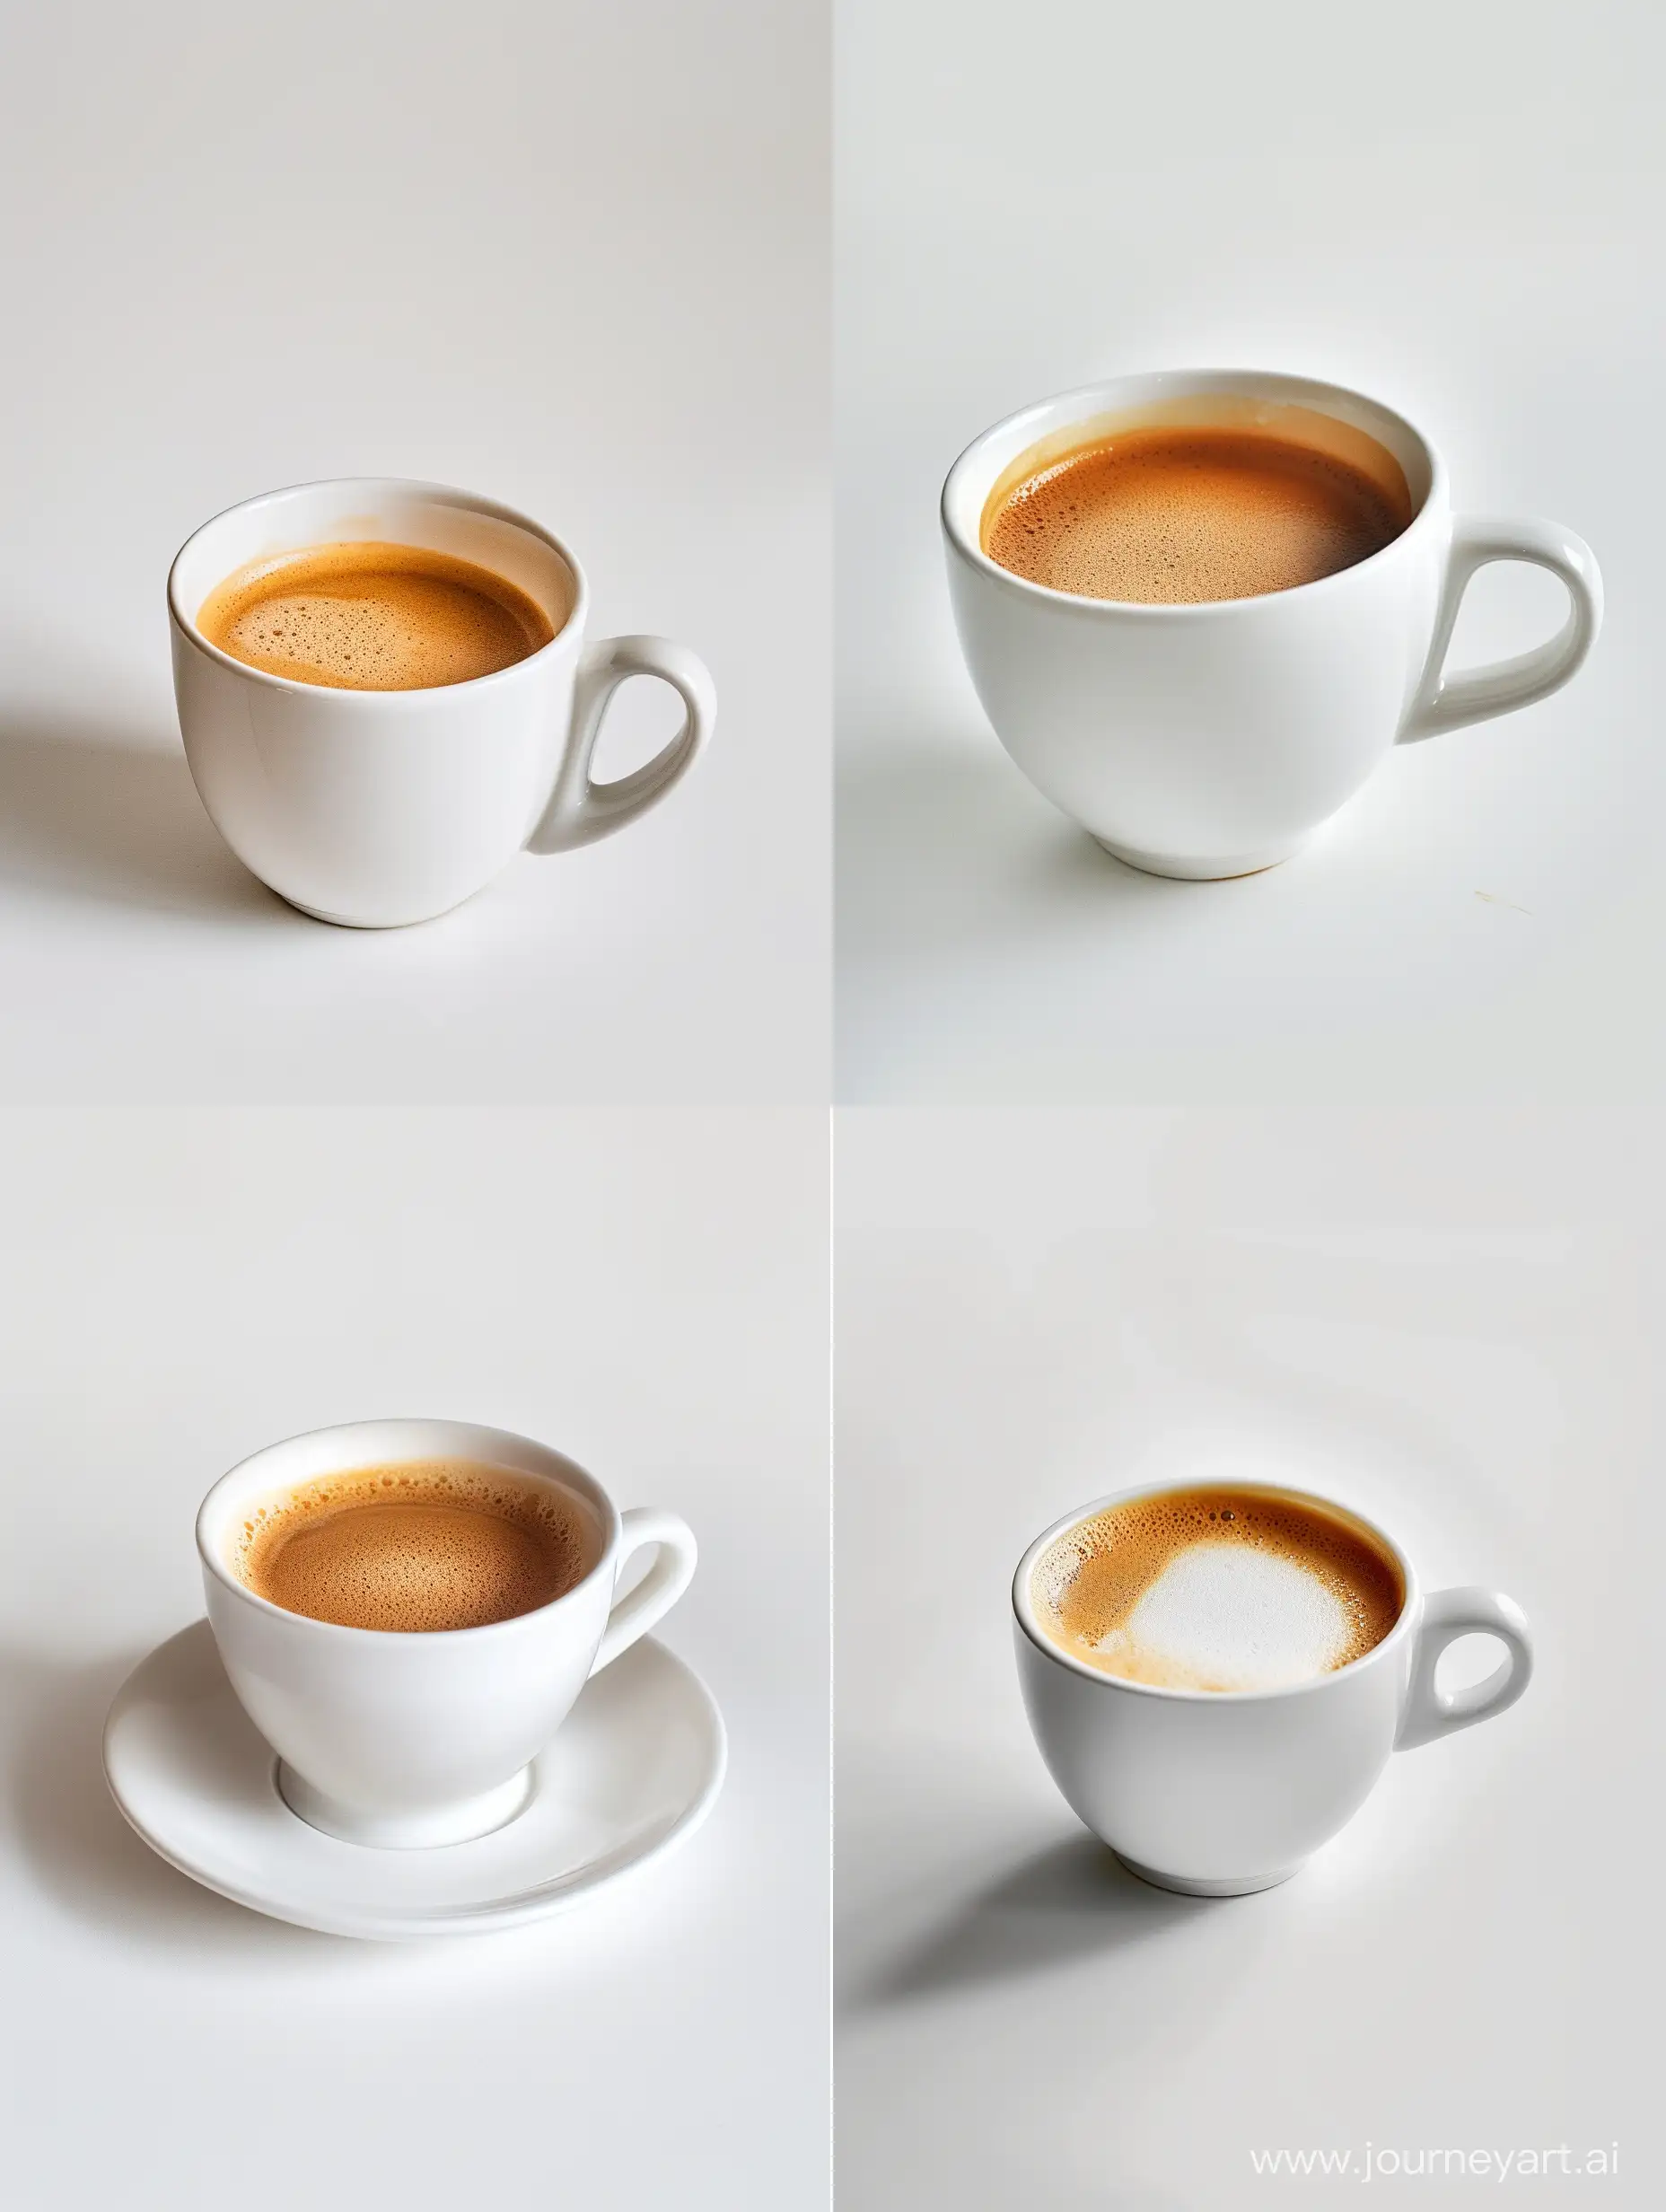 Glossy-Coffee-Cup-with-Foam-on-White-Background-Studio-Photography